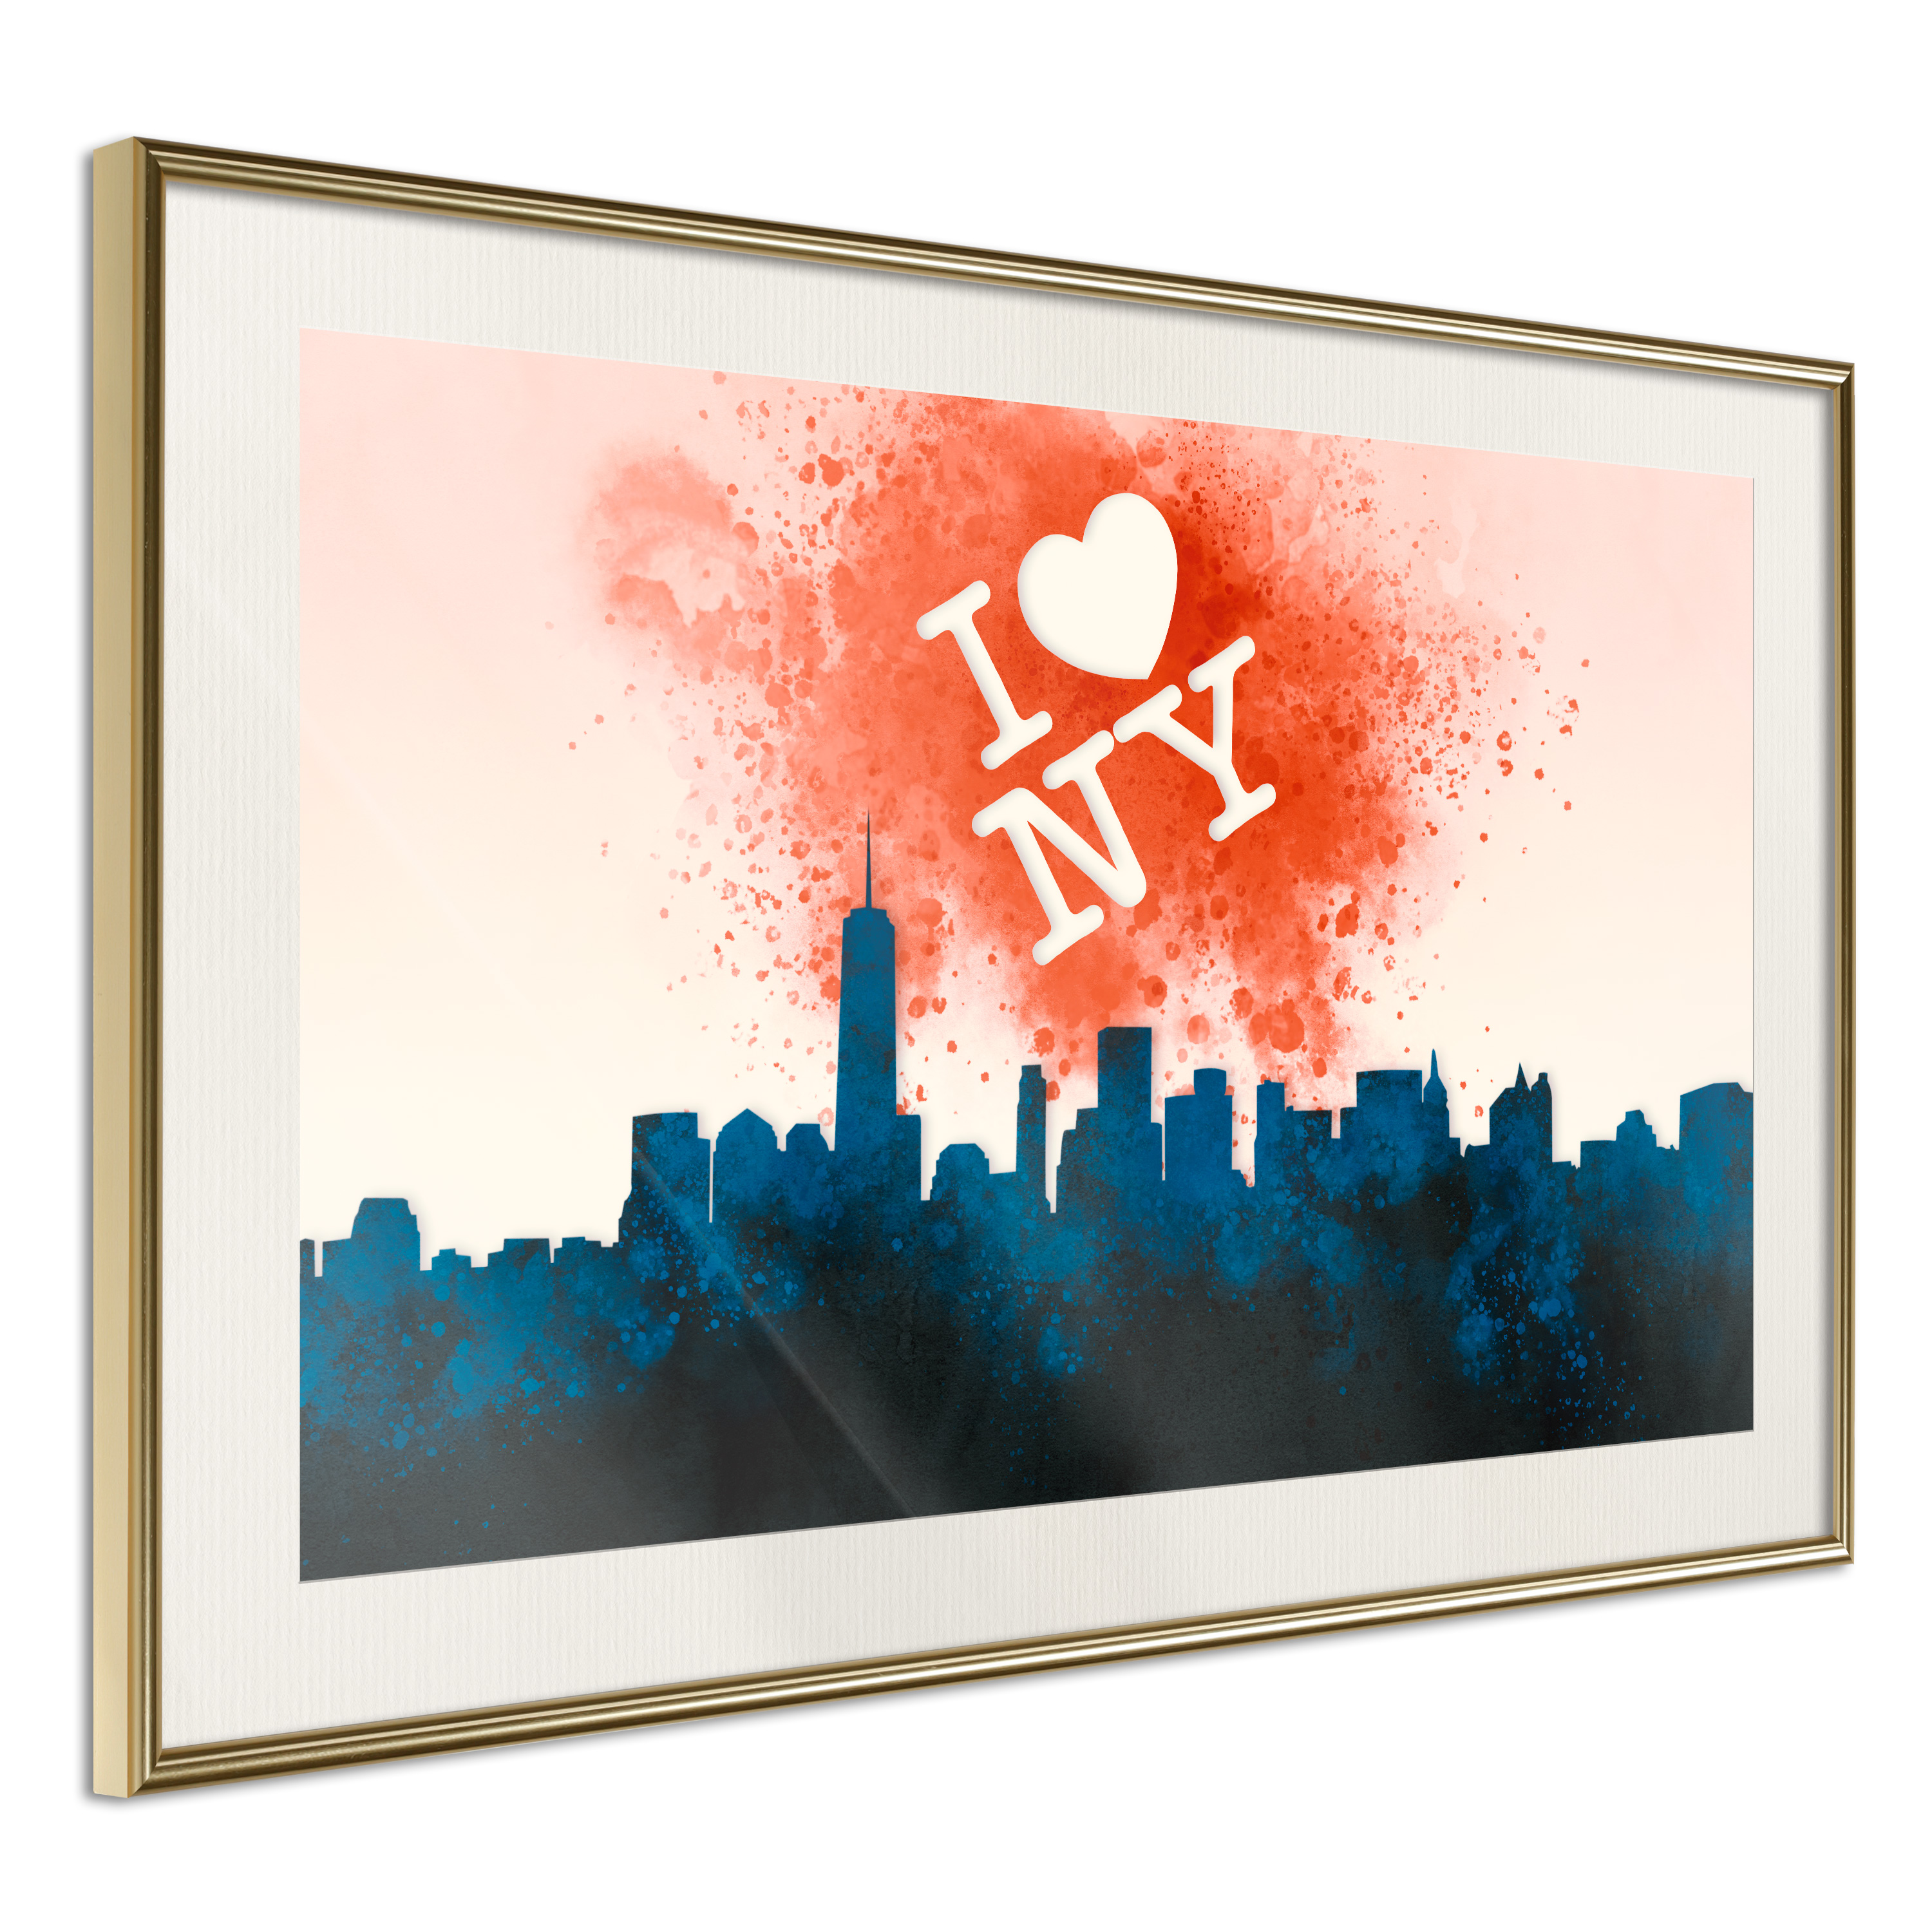 Poster - Inscription Above the City - 30x20